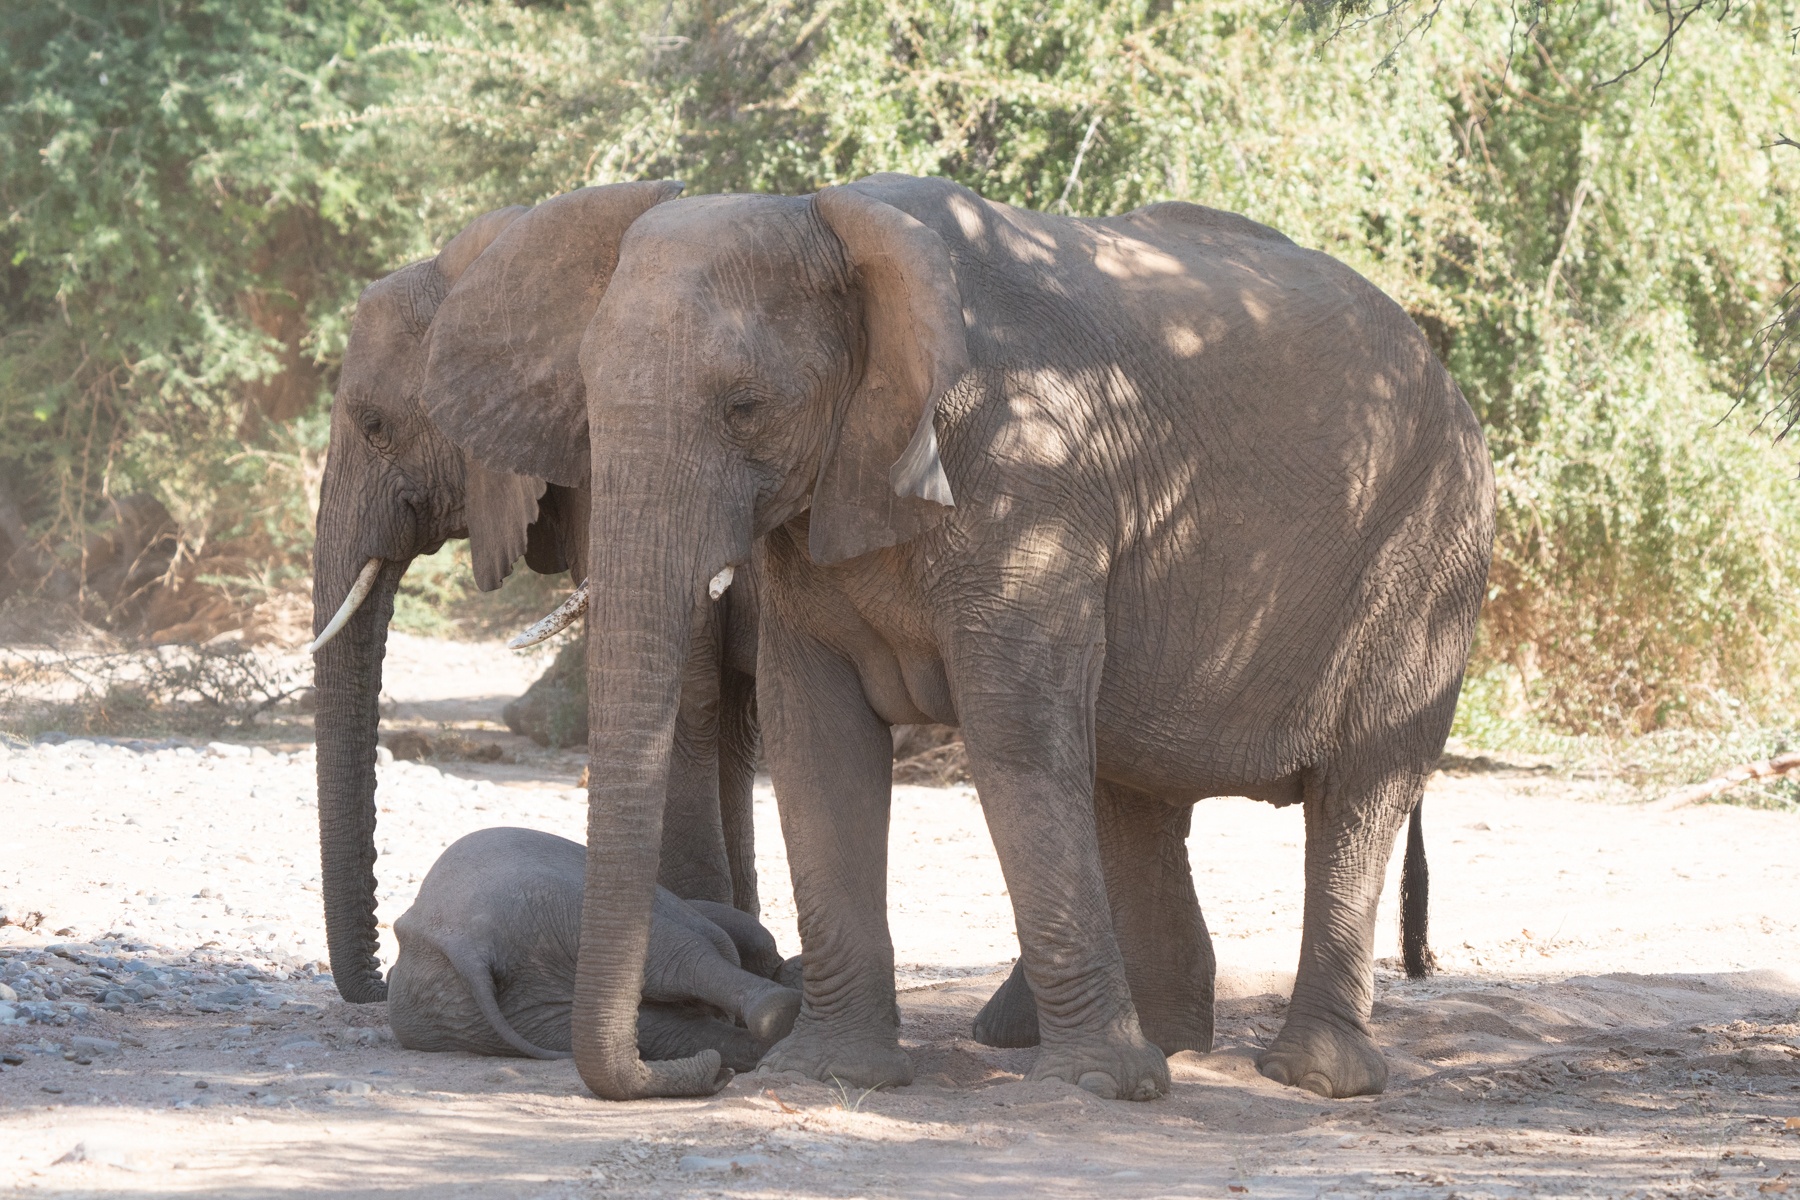 Suffering from too much milk, one of Namibia's desert elephant babies takes a nap at its mother's feet